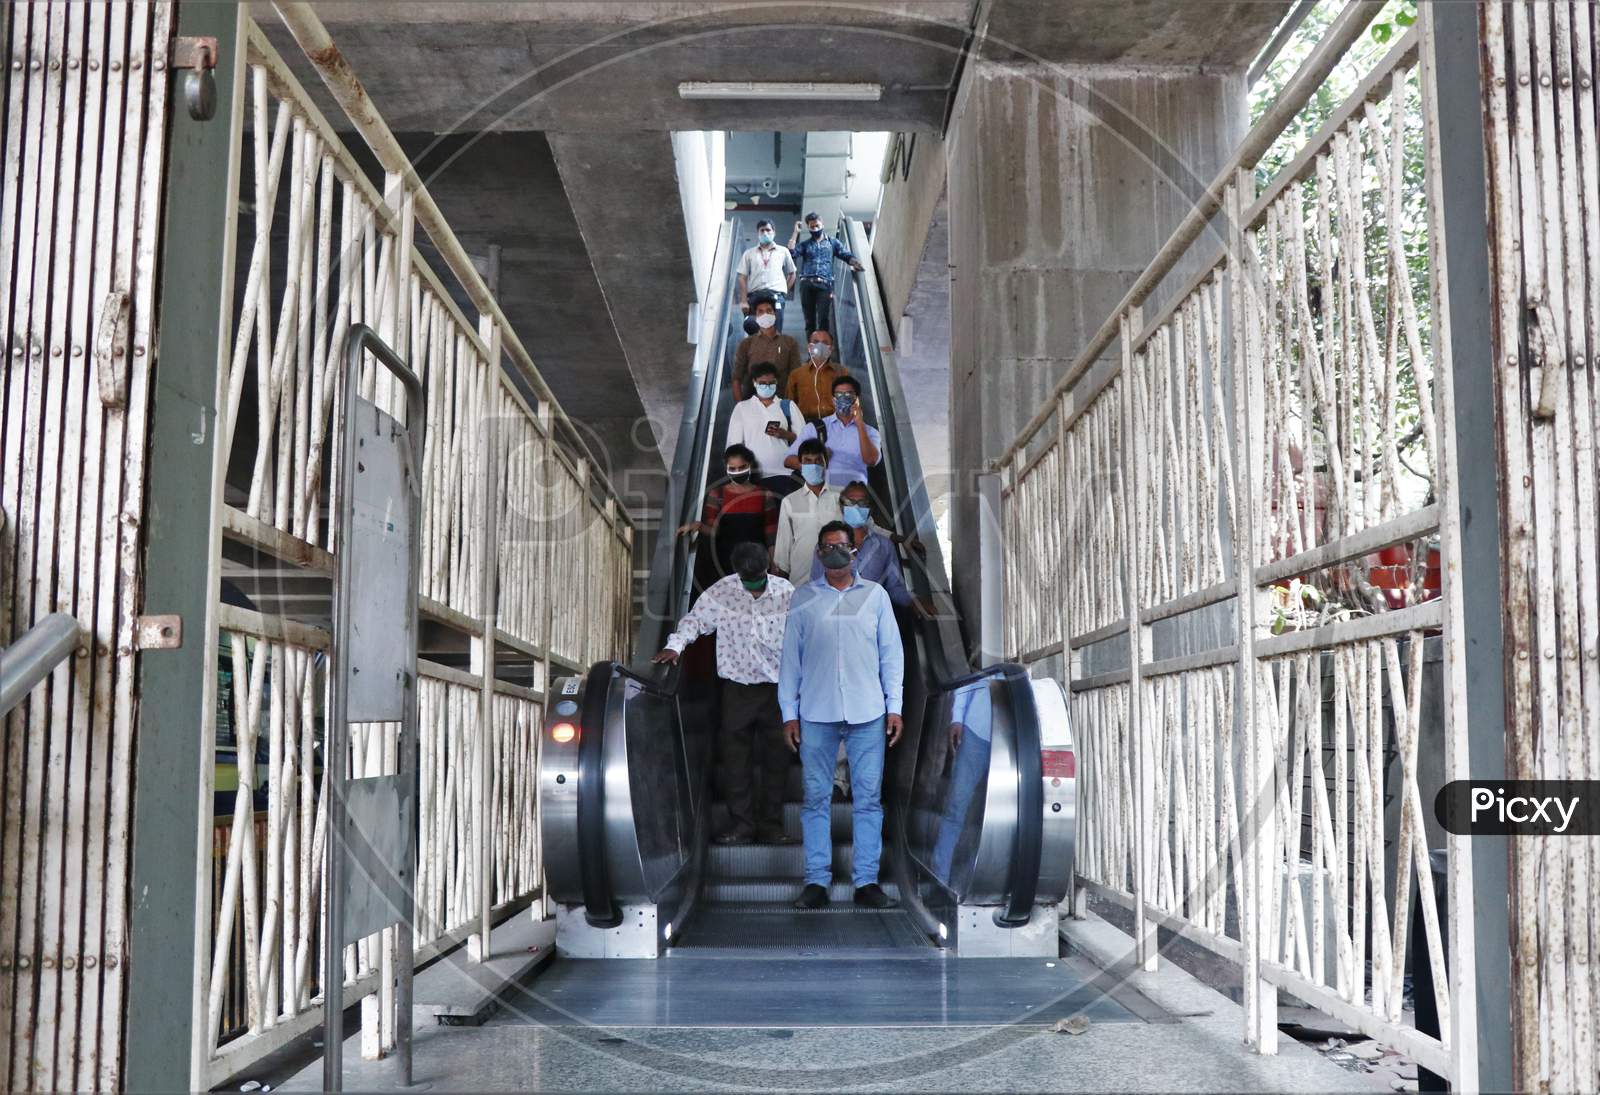 Commuters wearing face masks are seen exiting a station, after metro resumed services, amidst the spread of the coronavirus disease (COVID-19) in Mumbai, India, October 28, 2020.